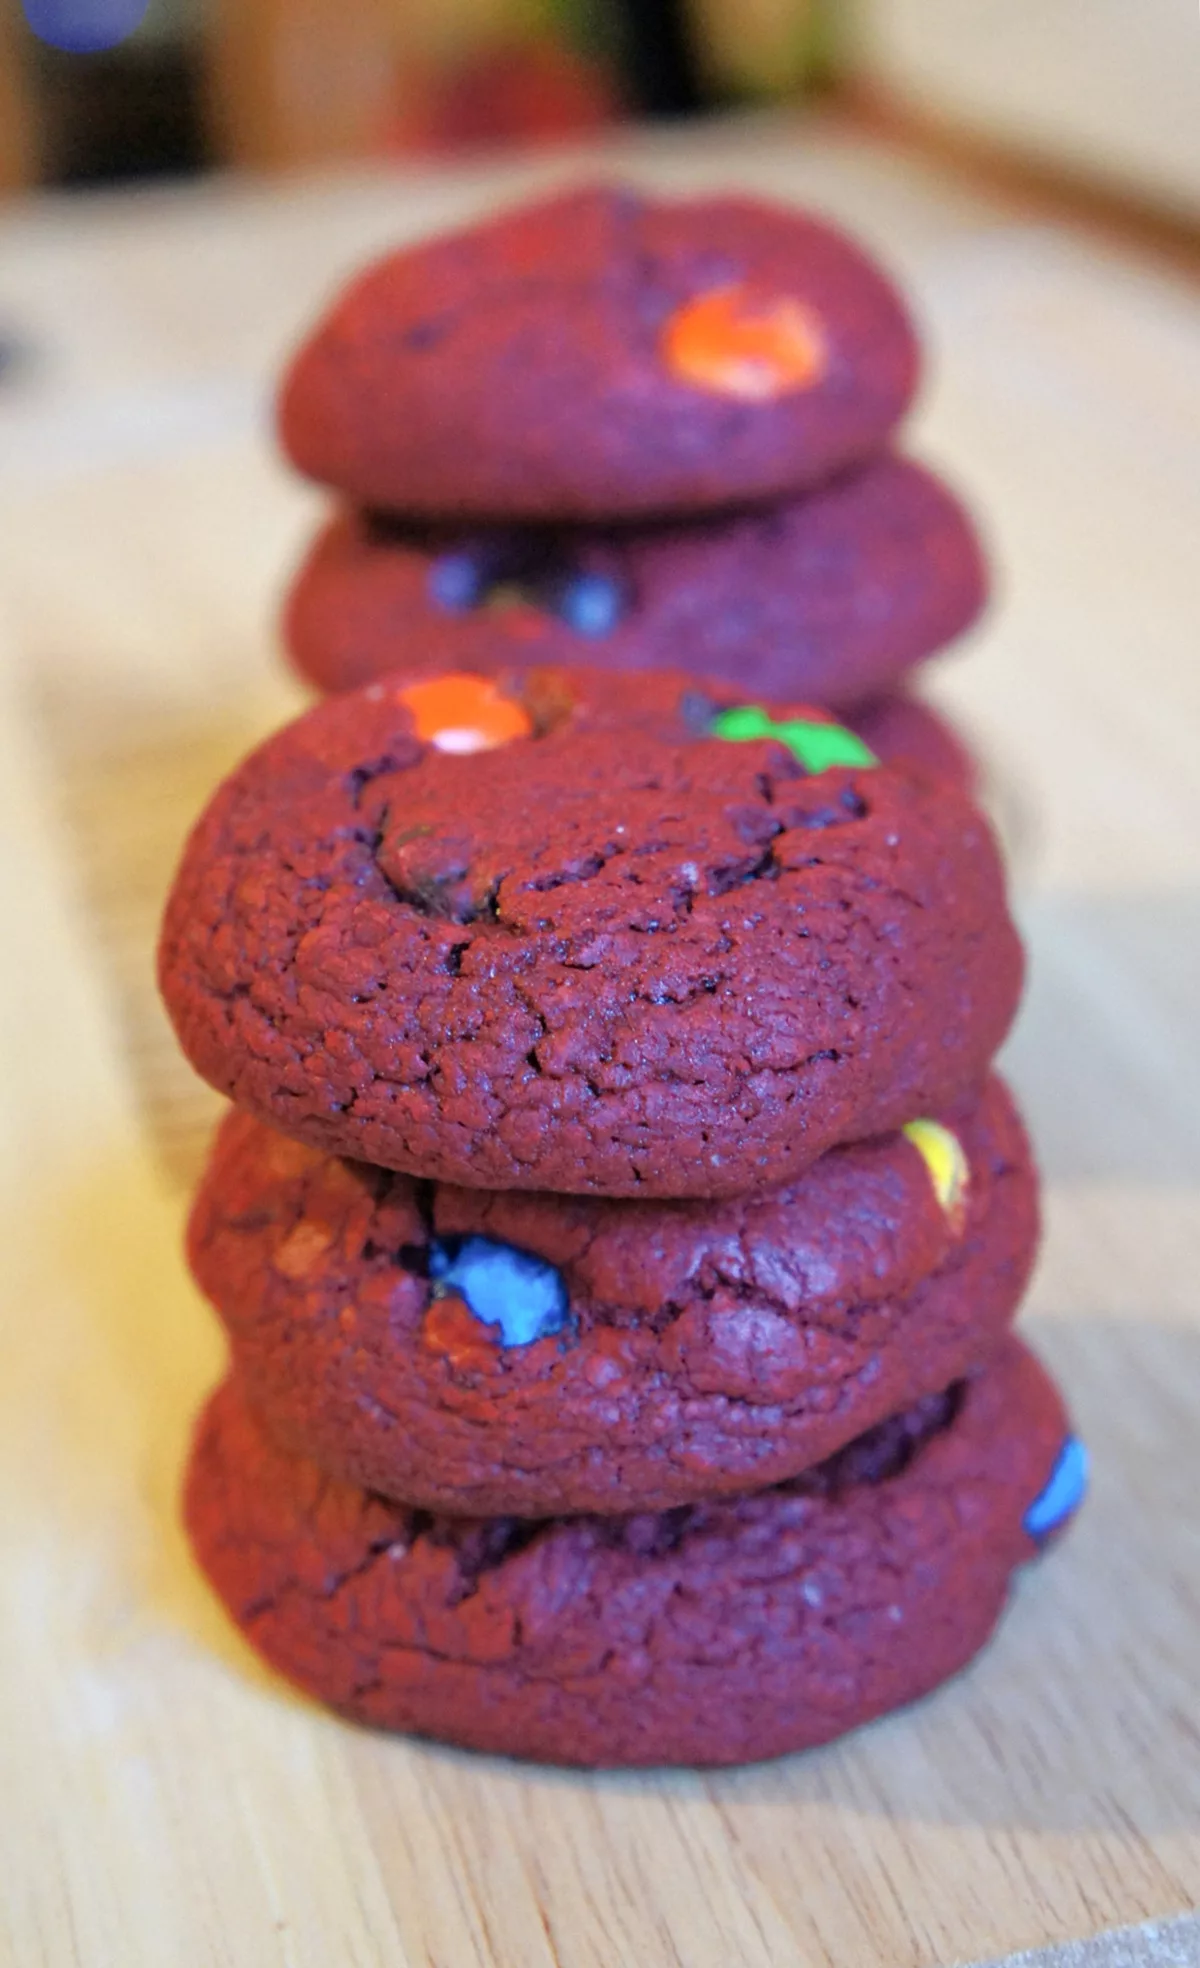 Red Velvet Cookies from Cake Mix with M&Ms in them